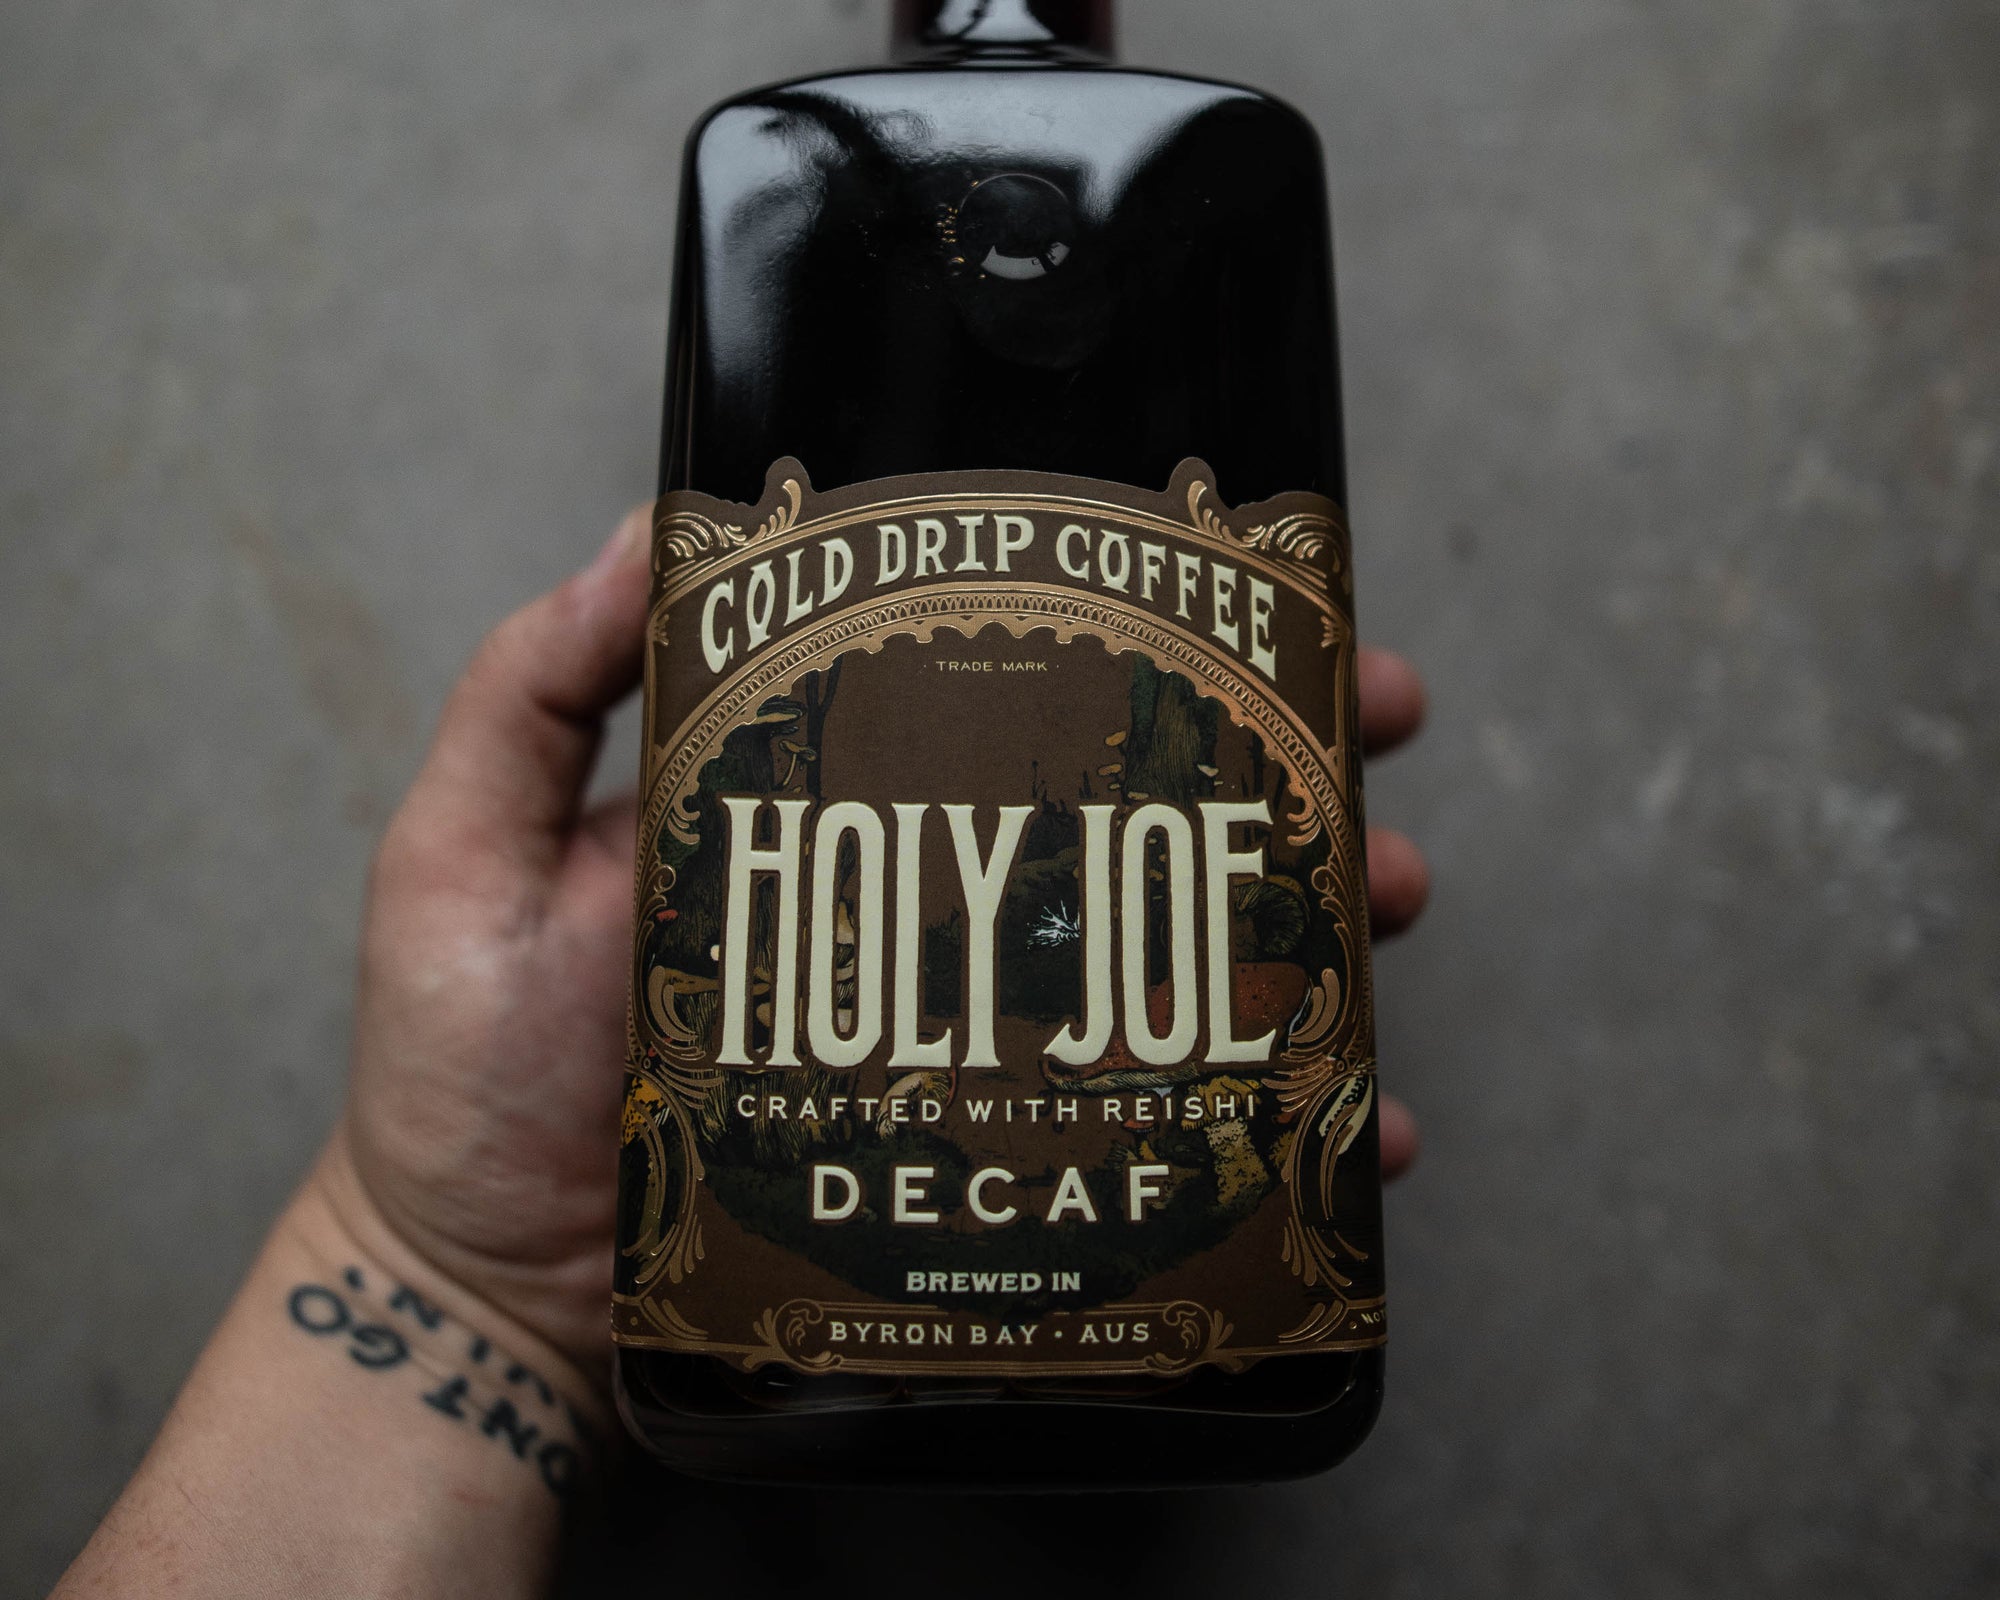 A full-flavoured latte, made with Holy Joe Decaf